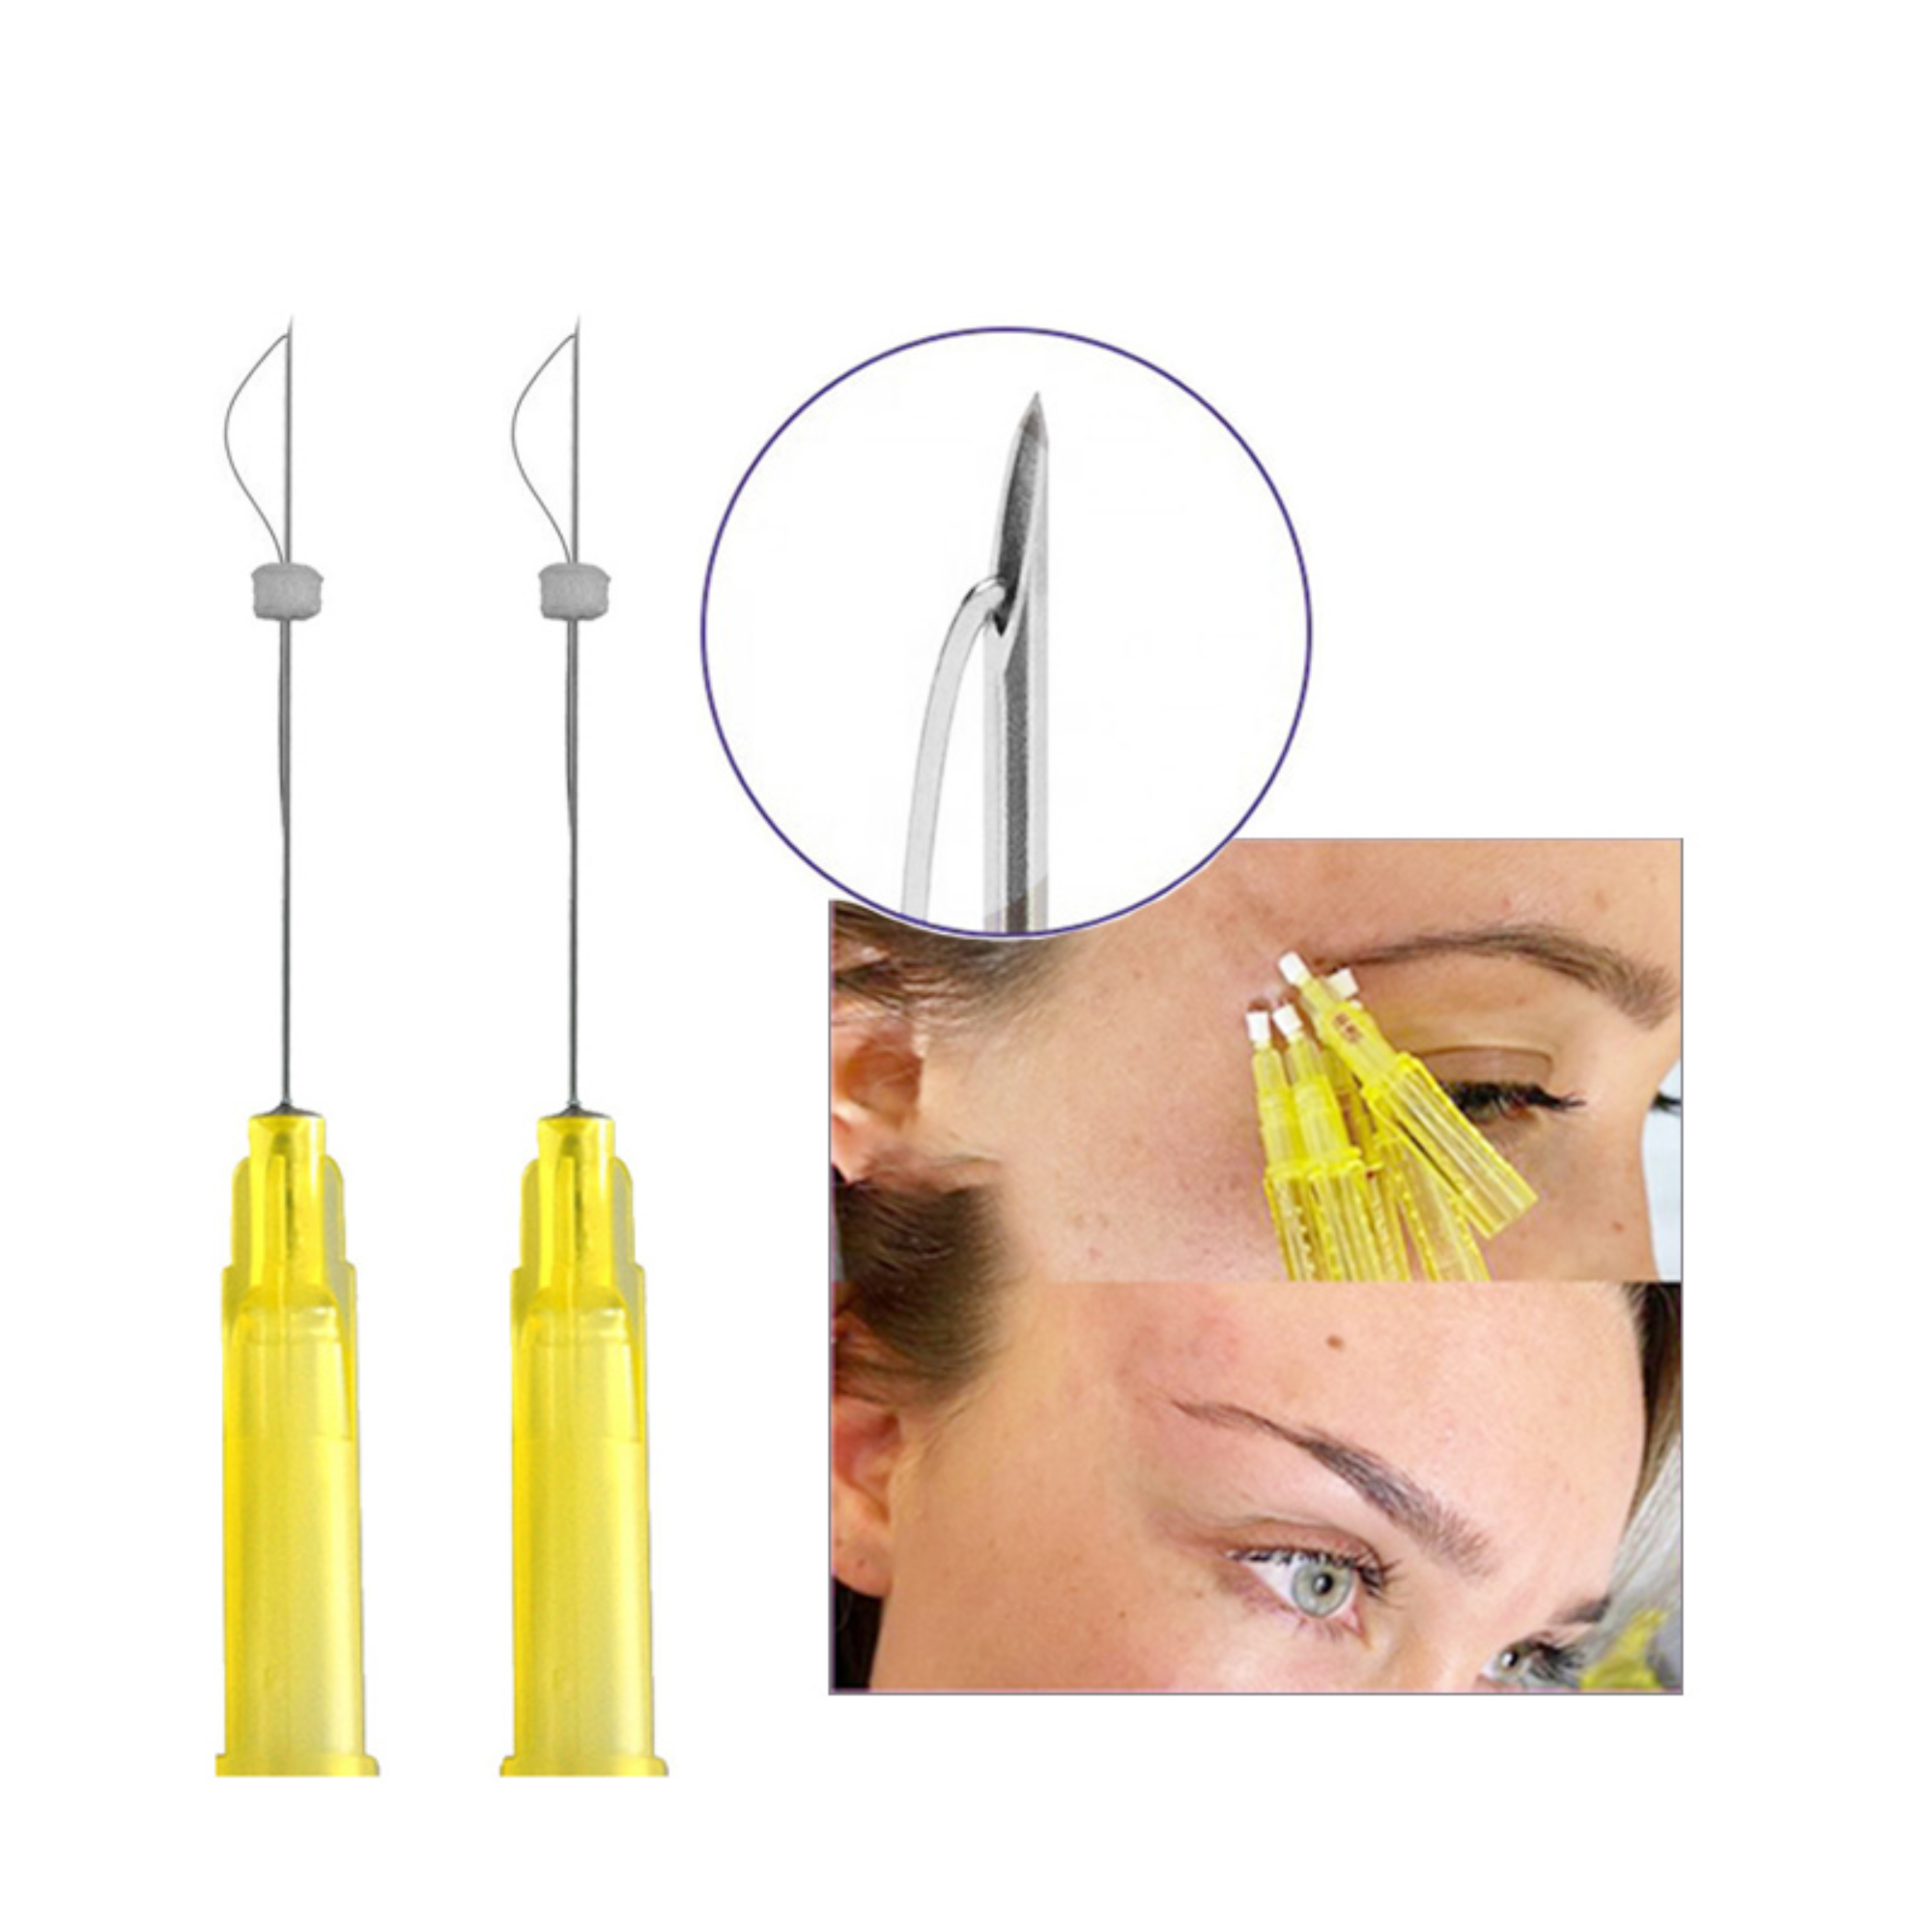 Beauty Clinic Removal Wrinkles 26g 27g 29g 30g Hilos Tensores Smooth Mono Fios De Pcl Lift Thread